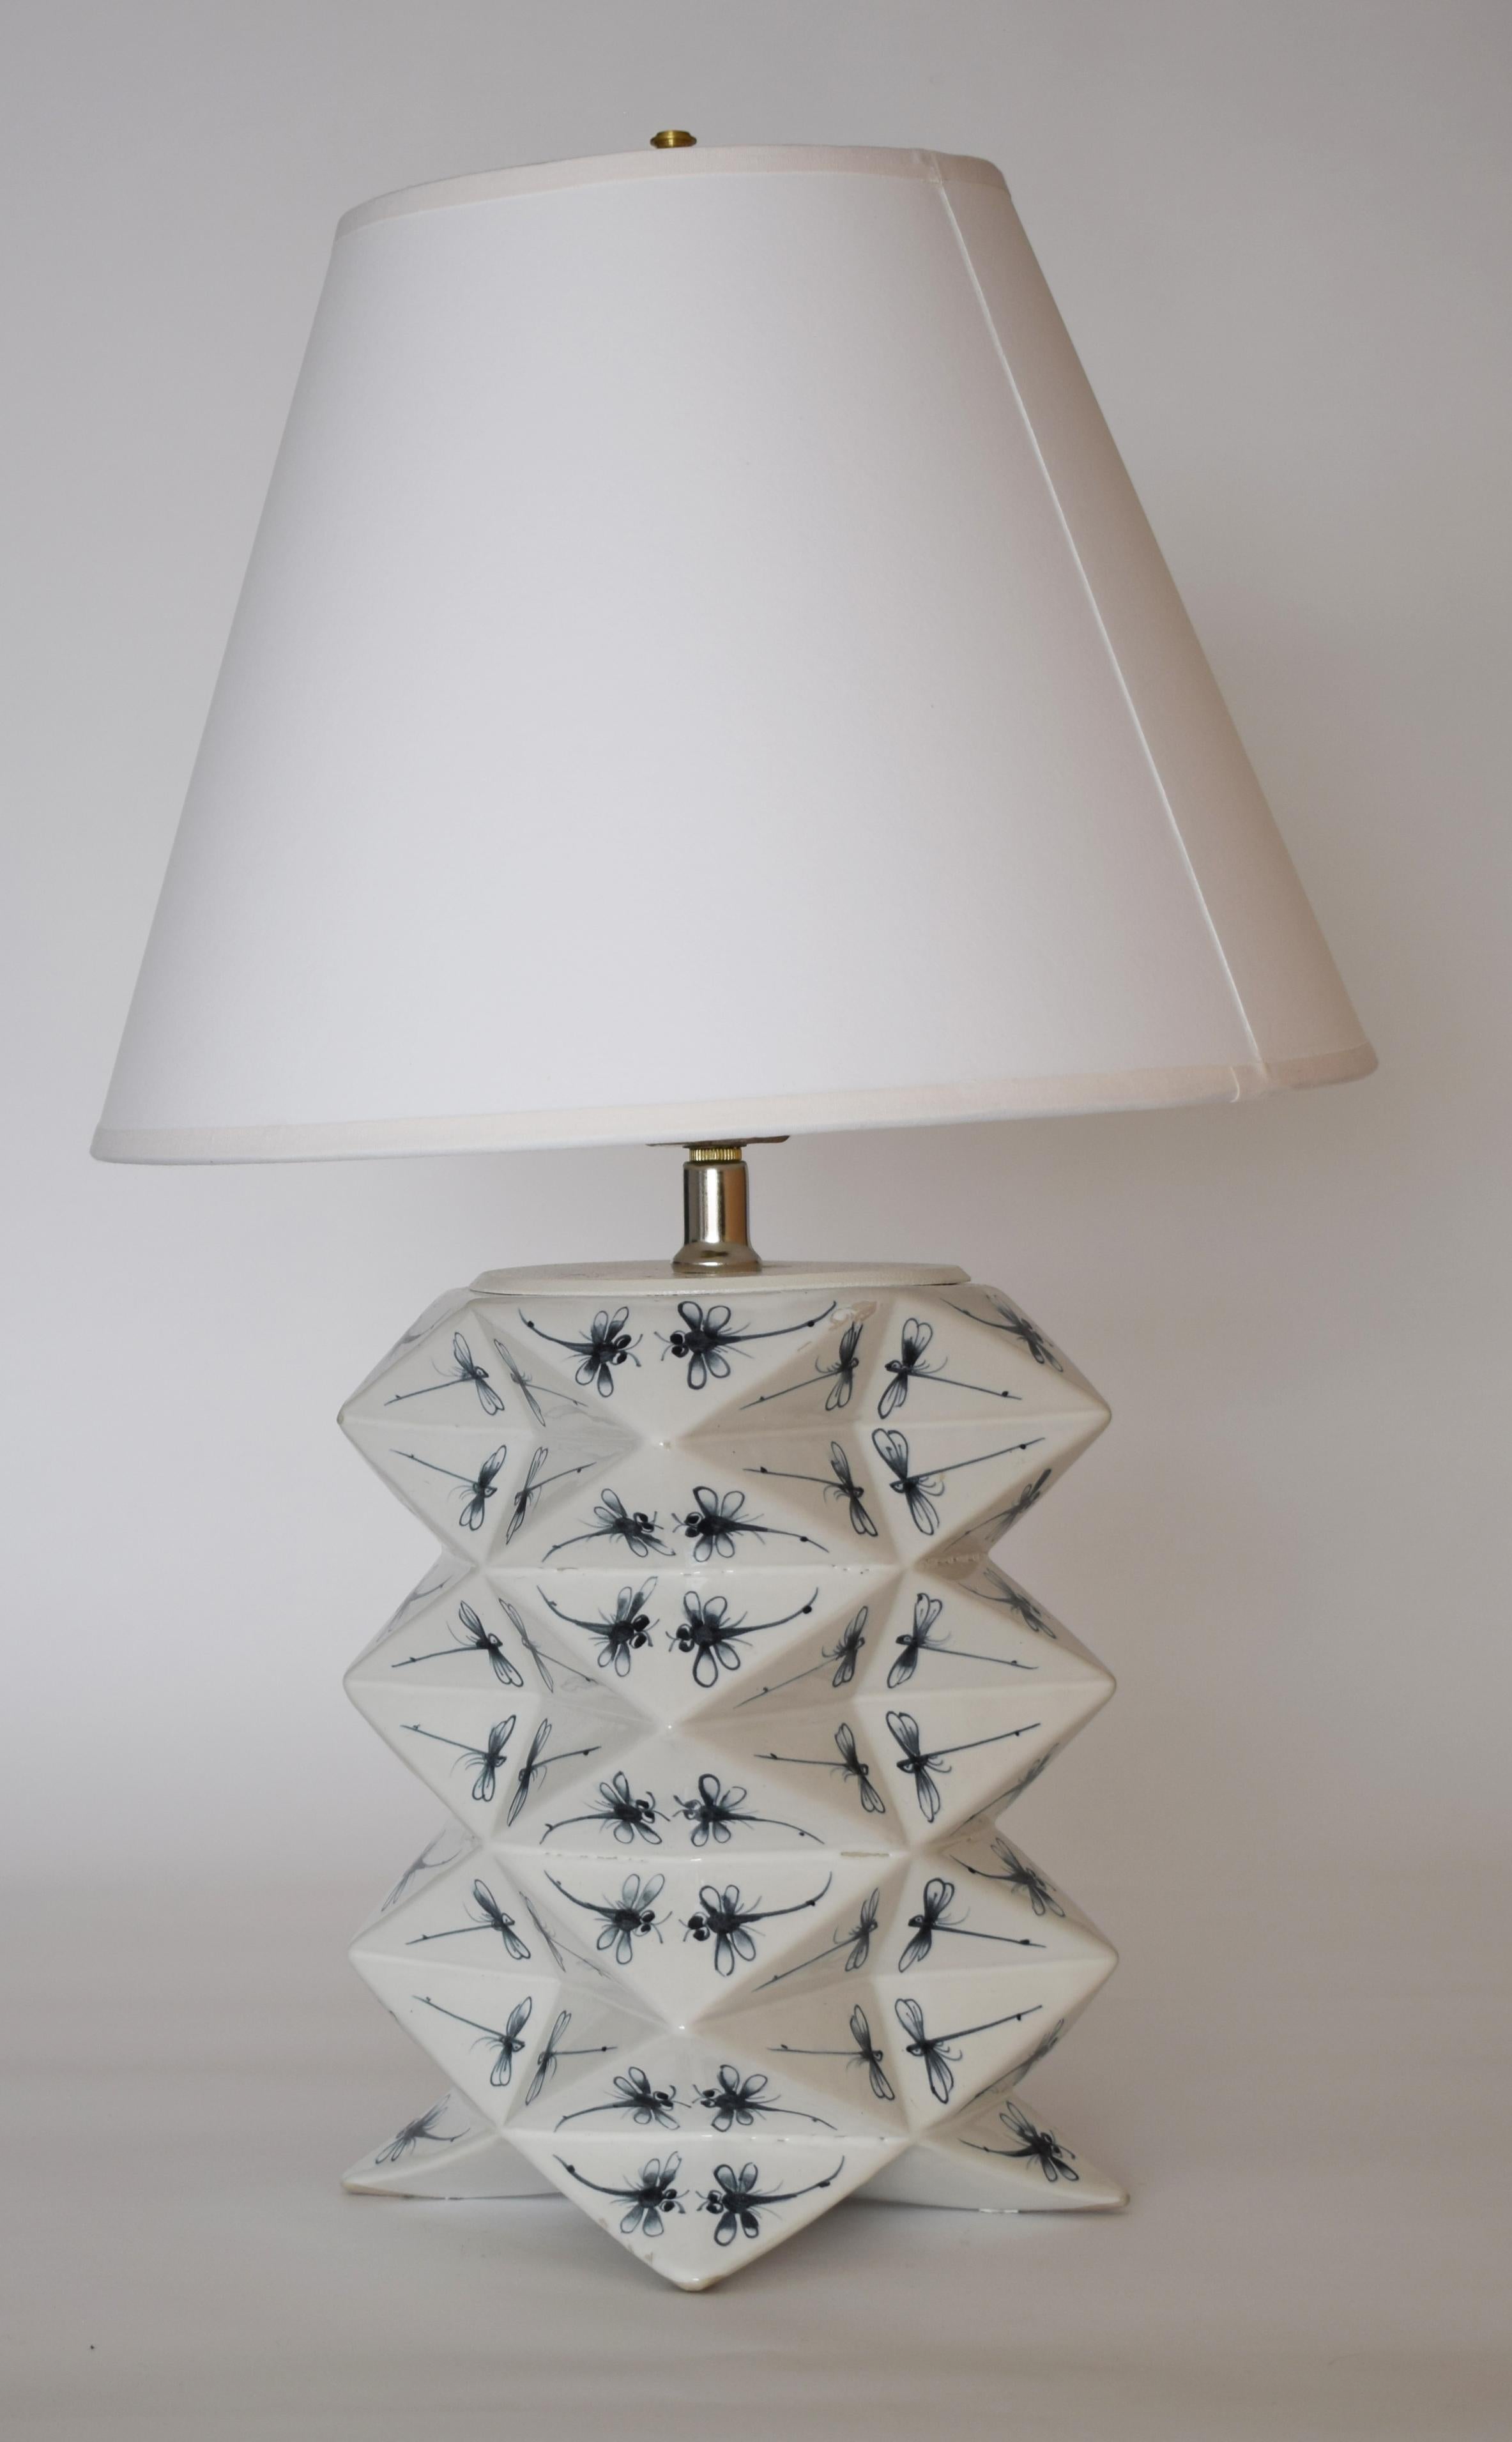 Modern Hand-painted Ceramic Vietnamese Dragonflies Origami Lamp by James Hicks For Sale